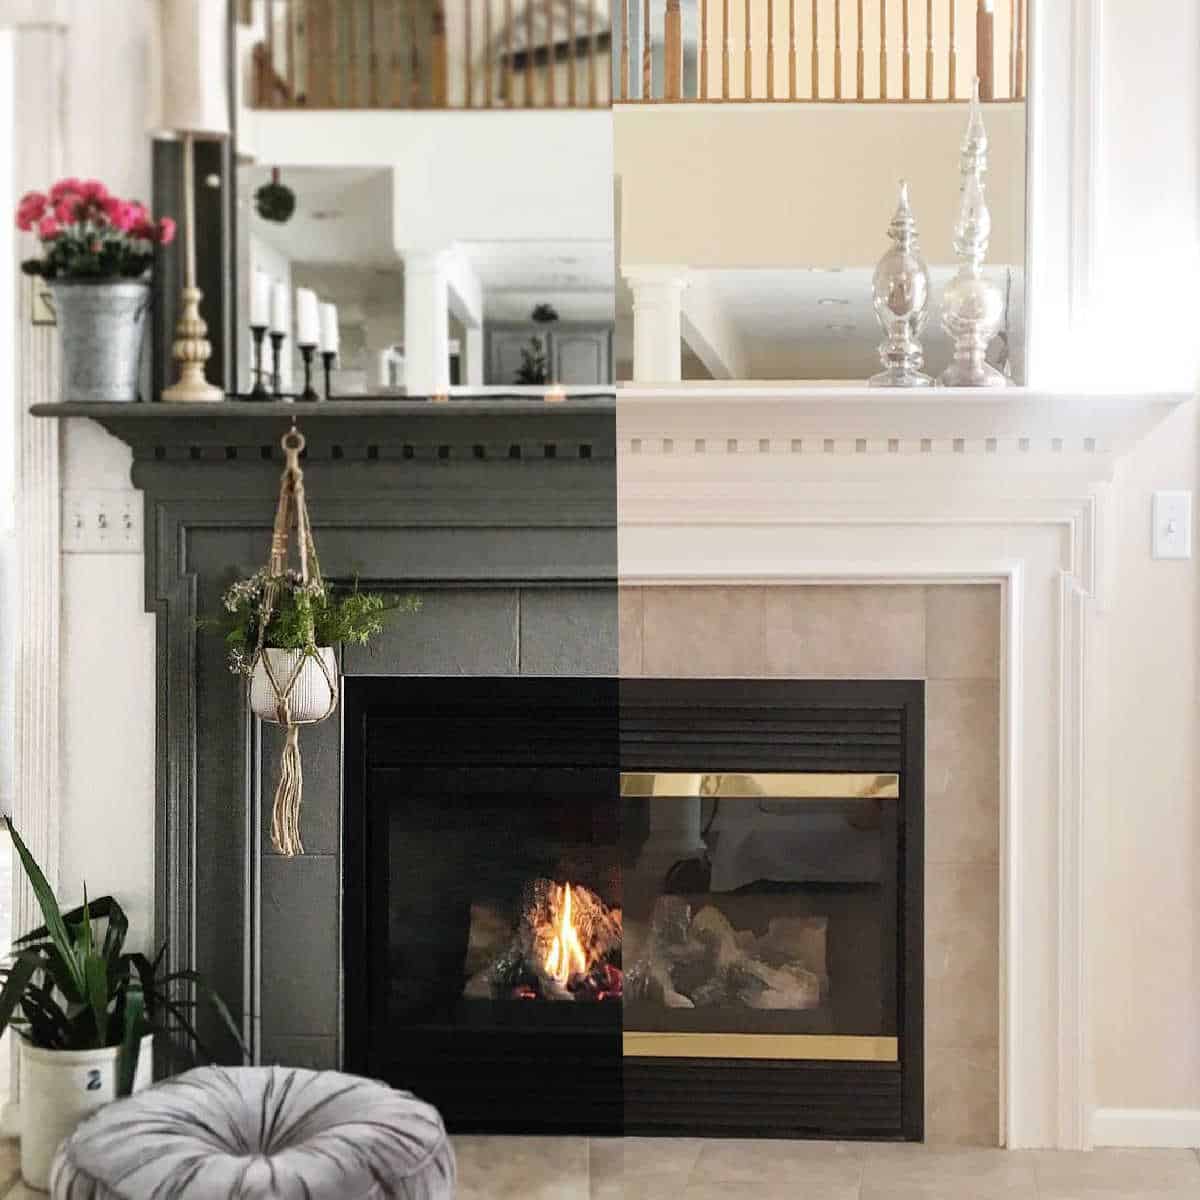 Mantel Makeover With Paint, Redoing Your Fireplace Mantel